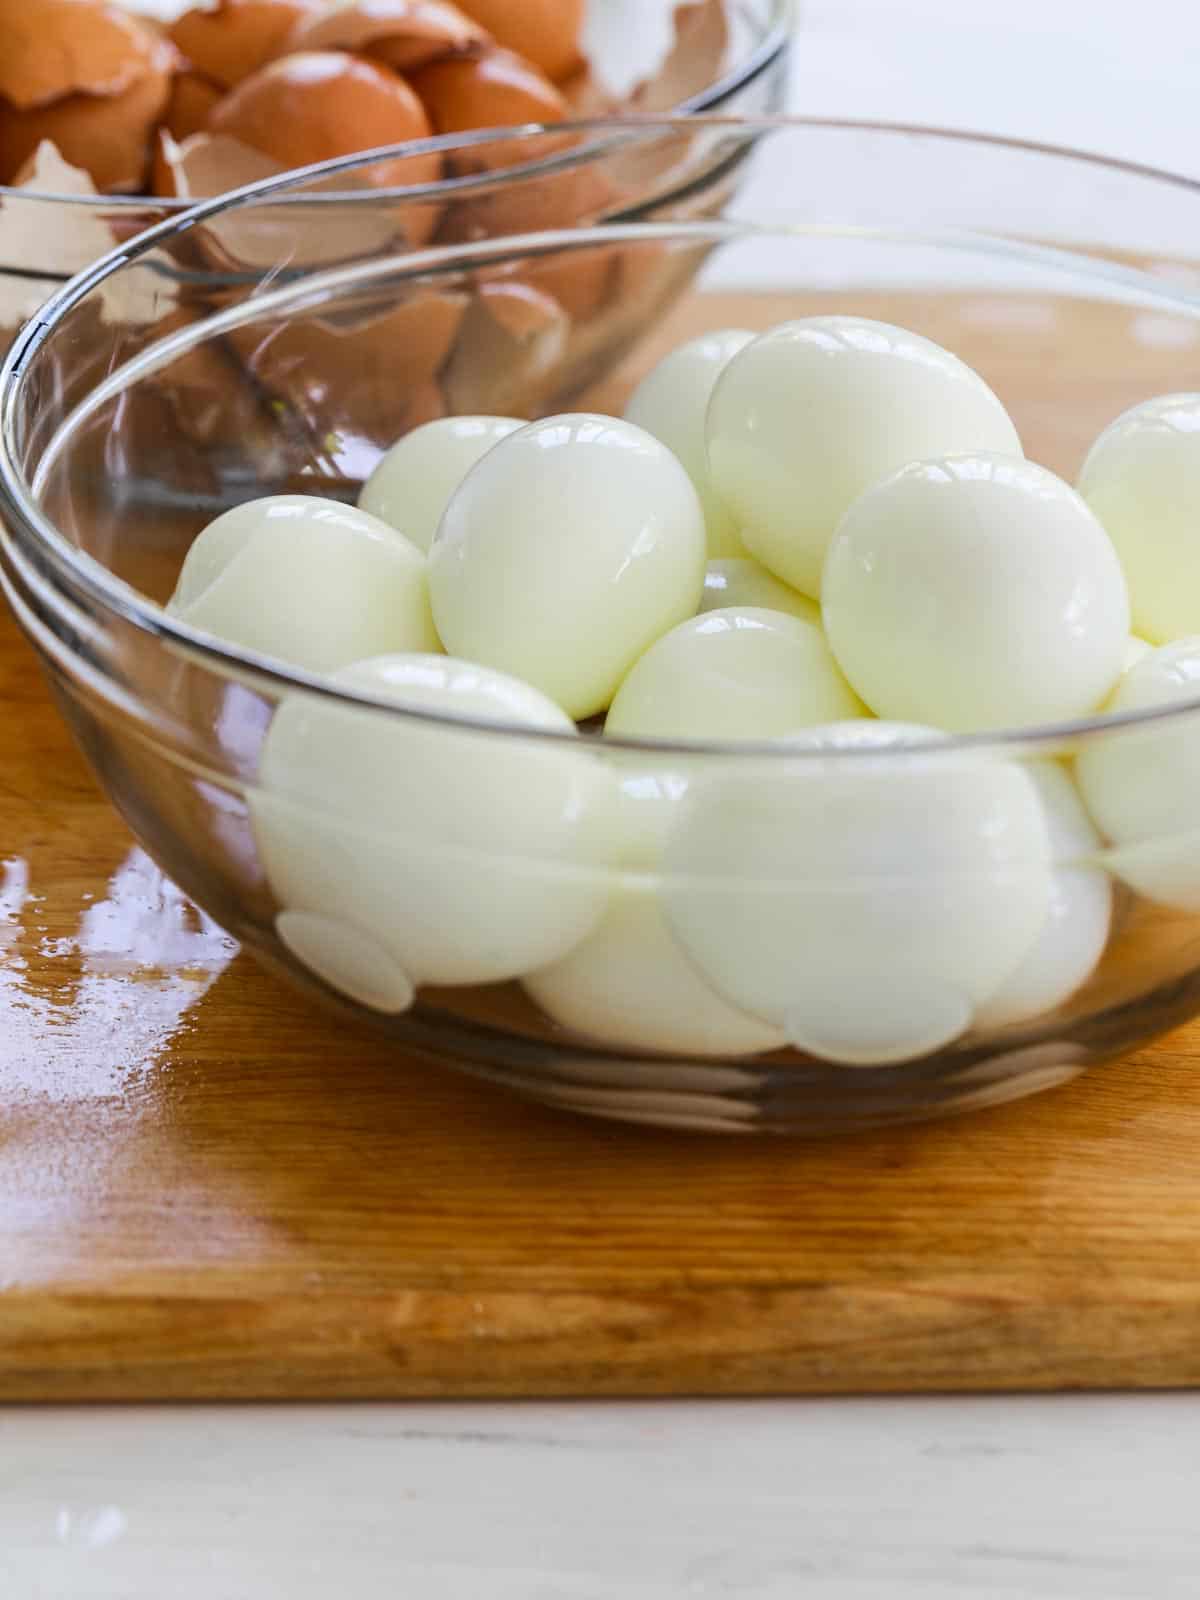 A large clear glass bowl filled with perfectly boiled eggs on a cutting board.